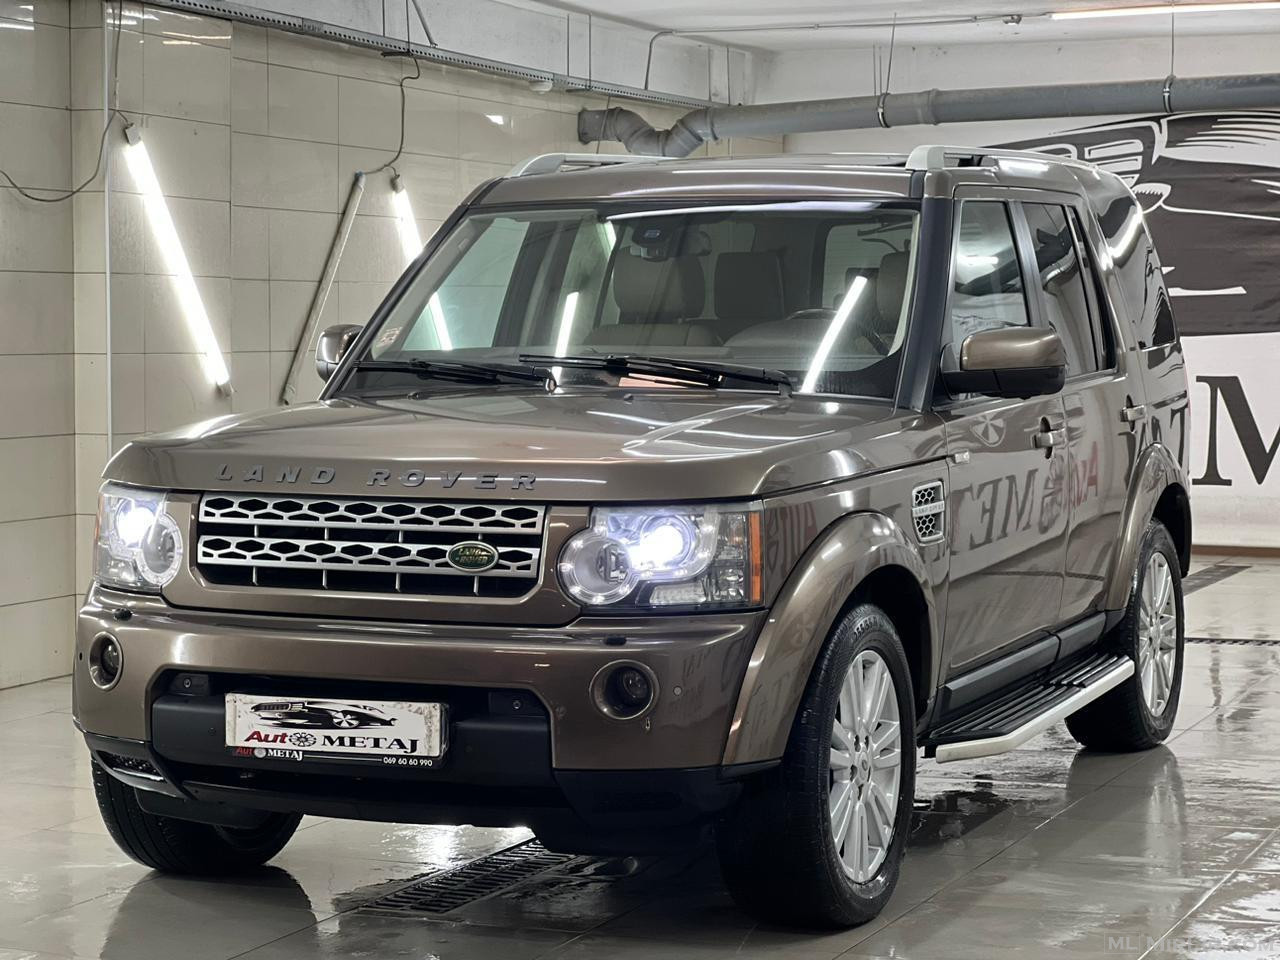 LAND ROVER DISCOVERY 4 Viti Prodhimit 2010 3.0 Diesel 